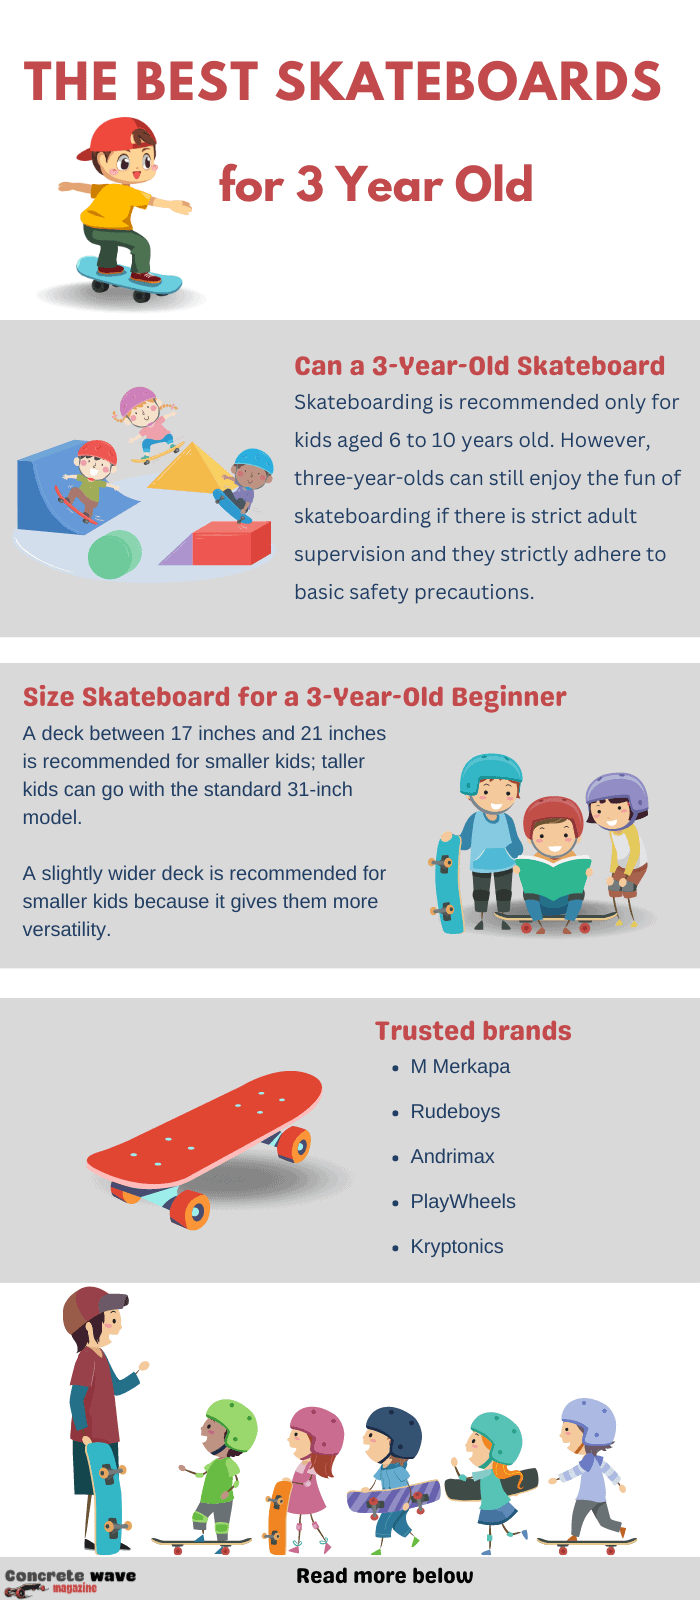 size-skateboard-for-3-year-old